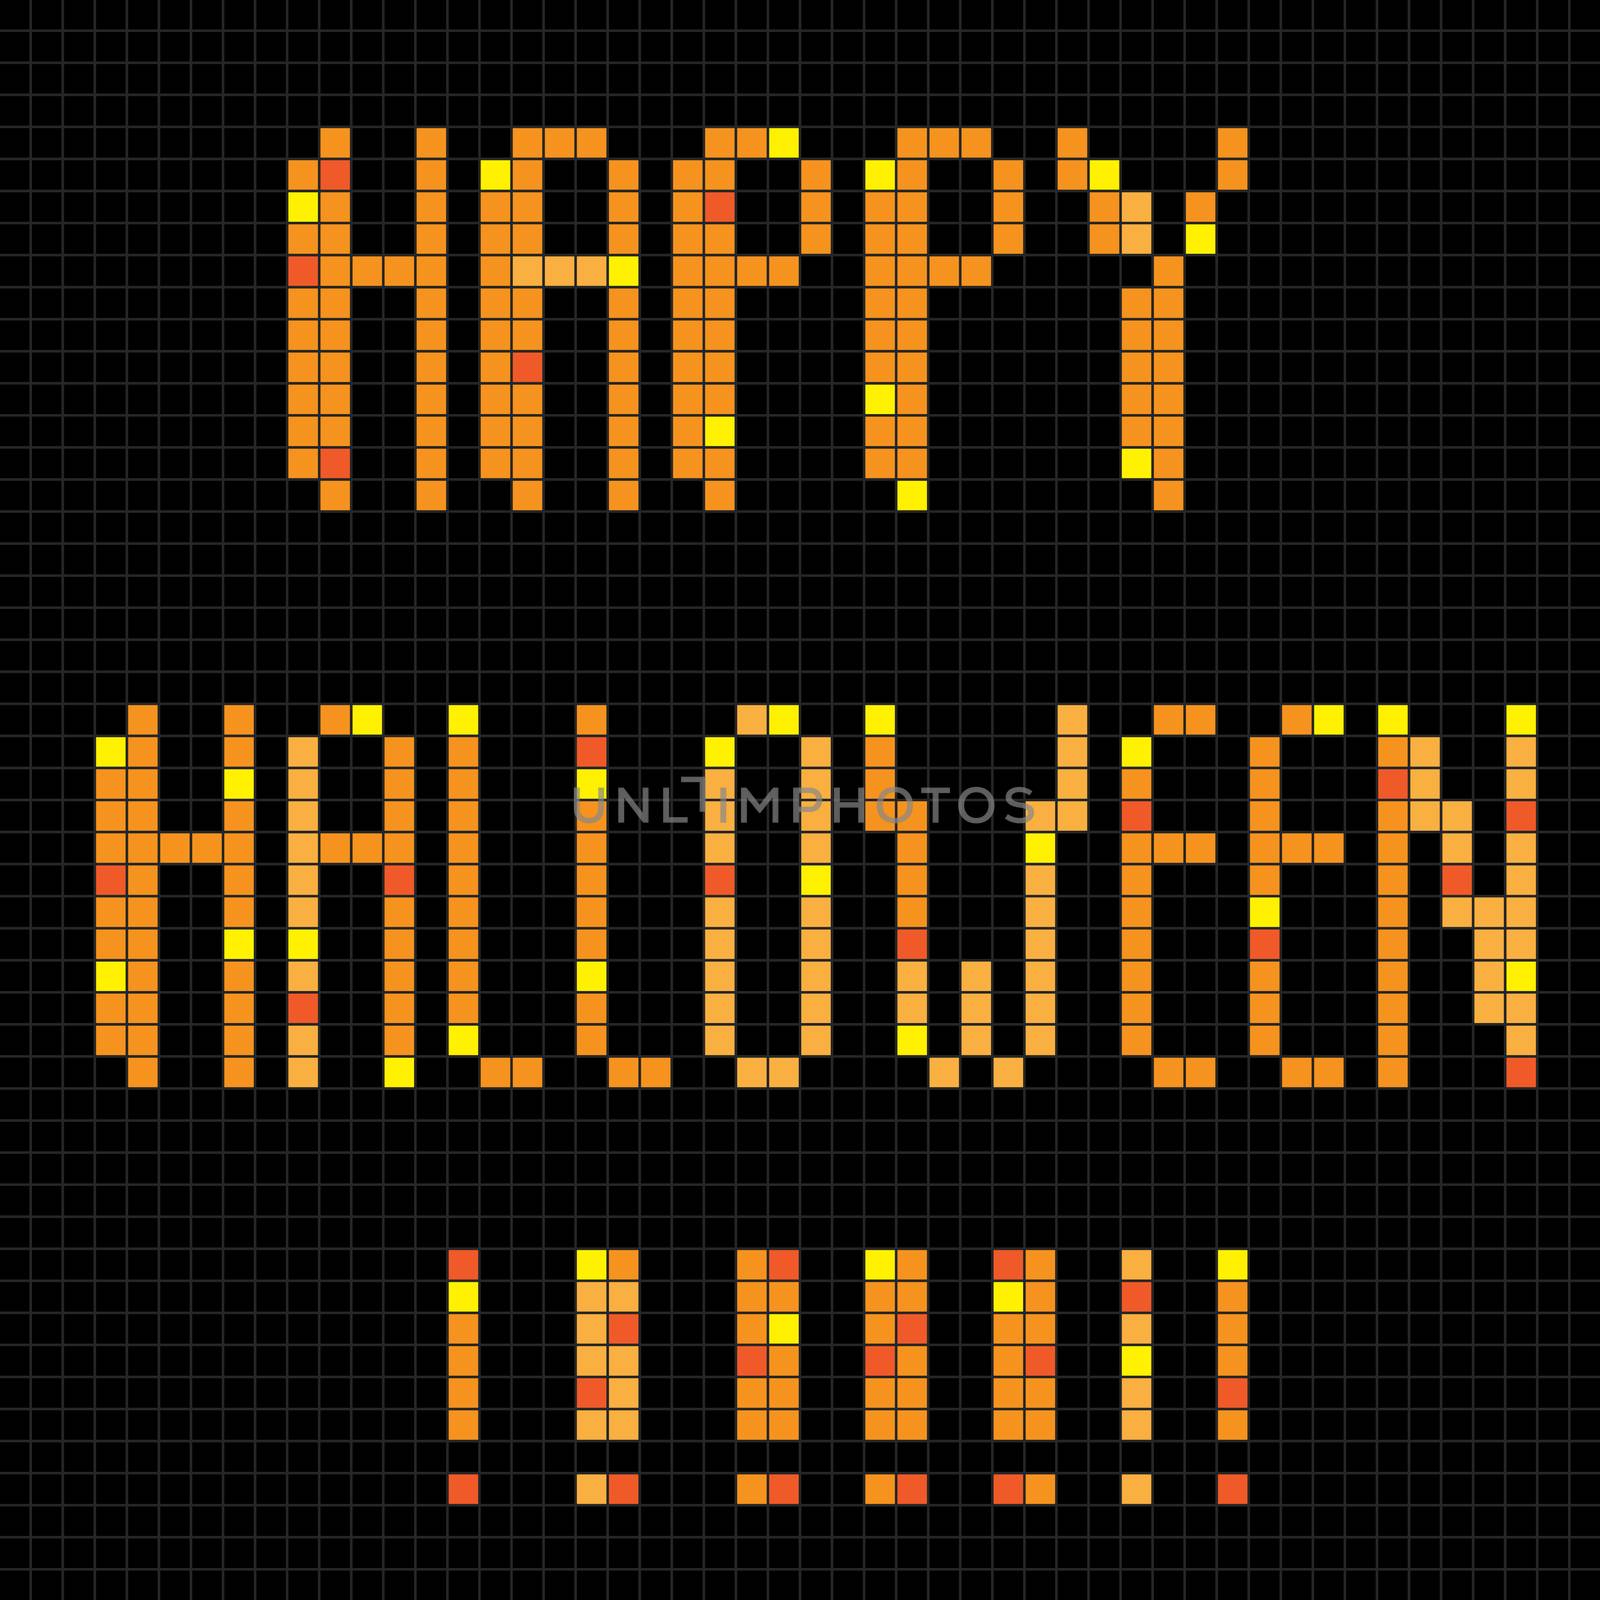 Halloween greetings card, pixel illustration of a scoreboard composition with digital text